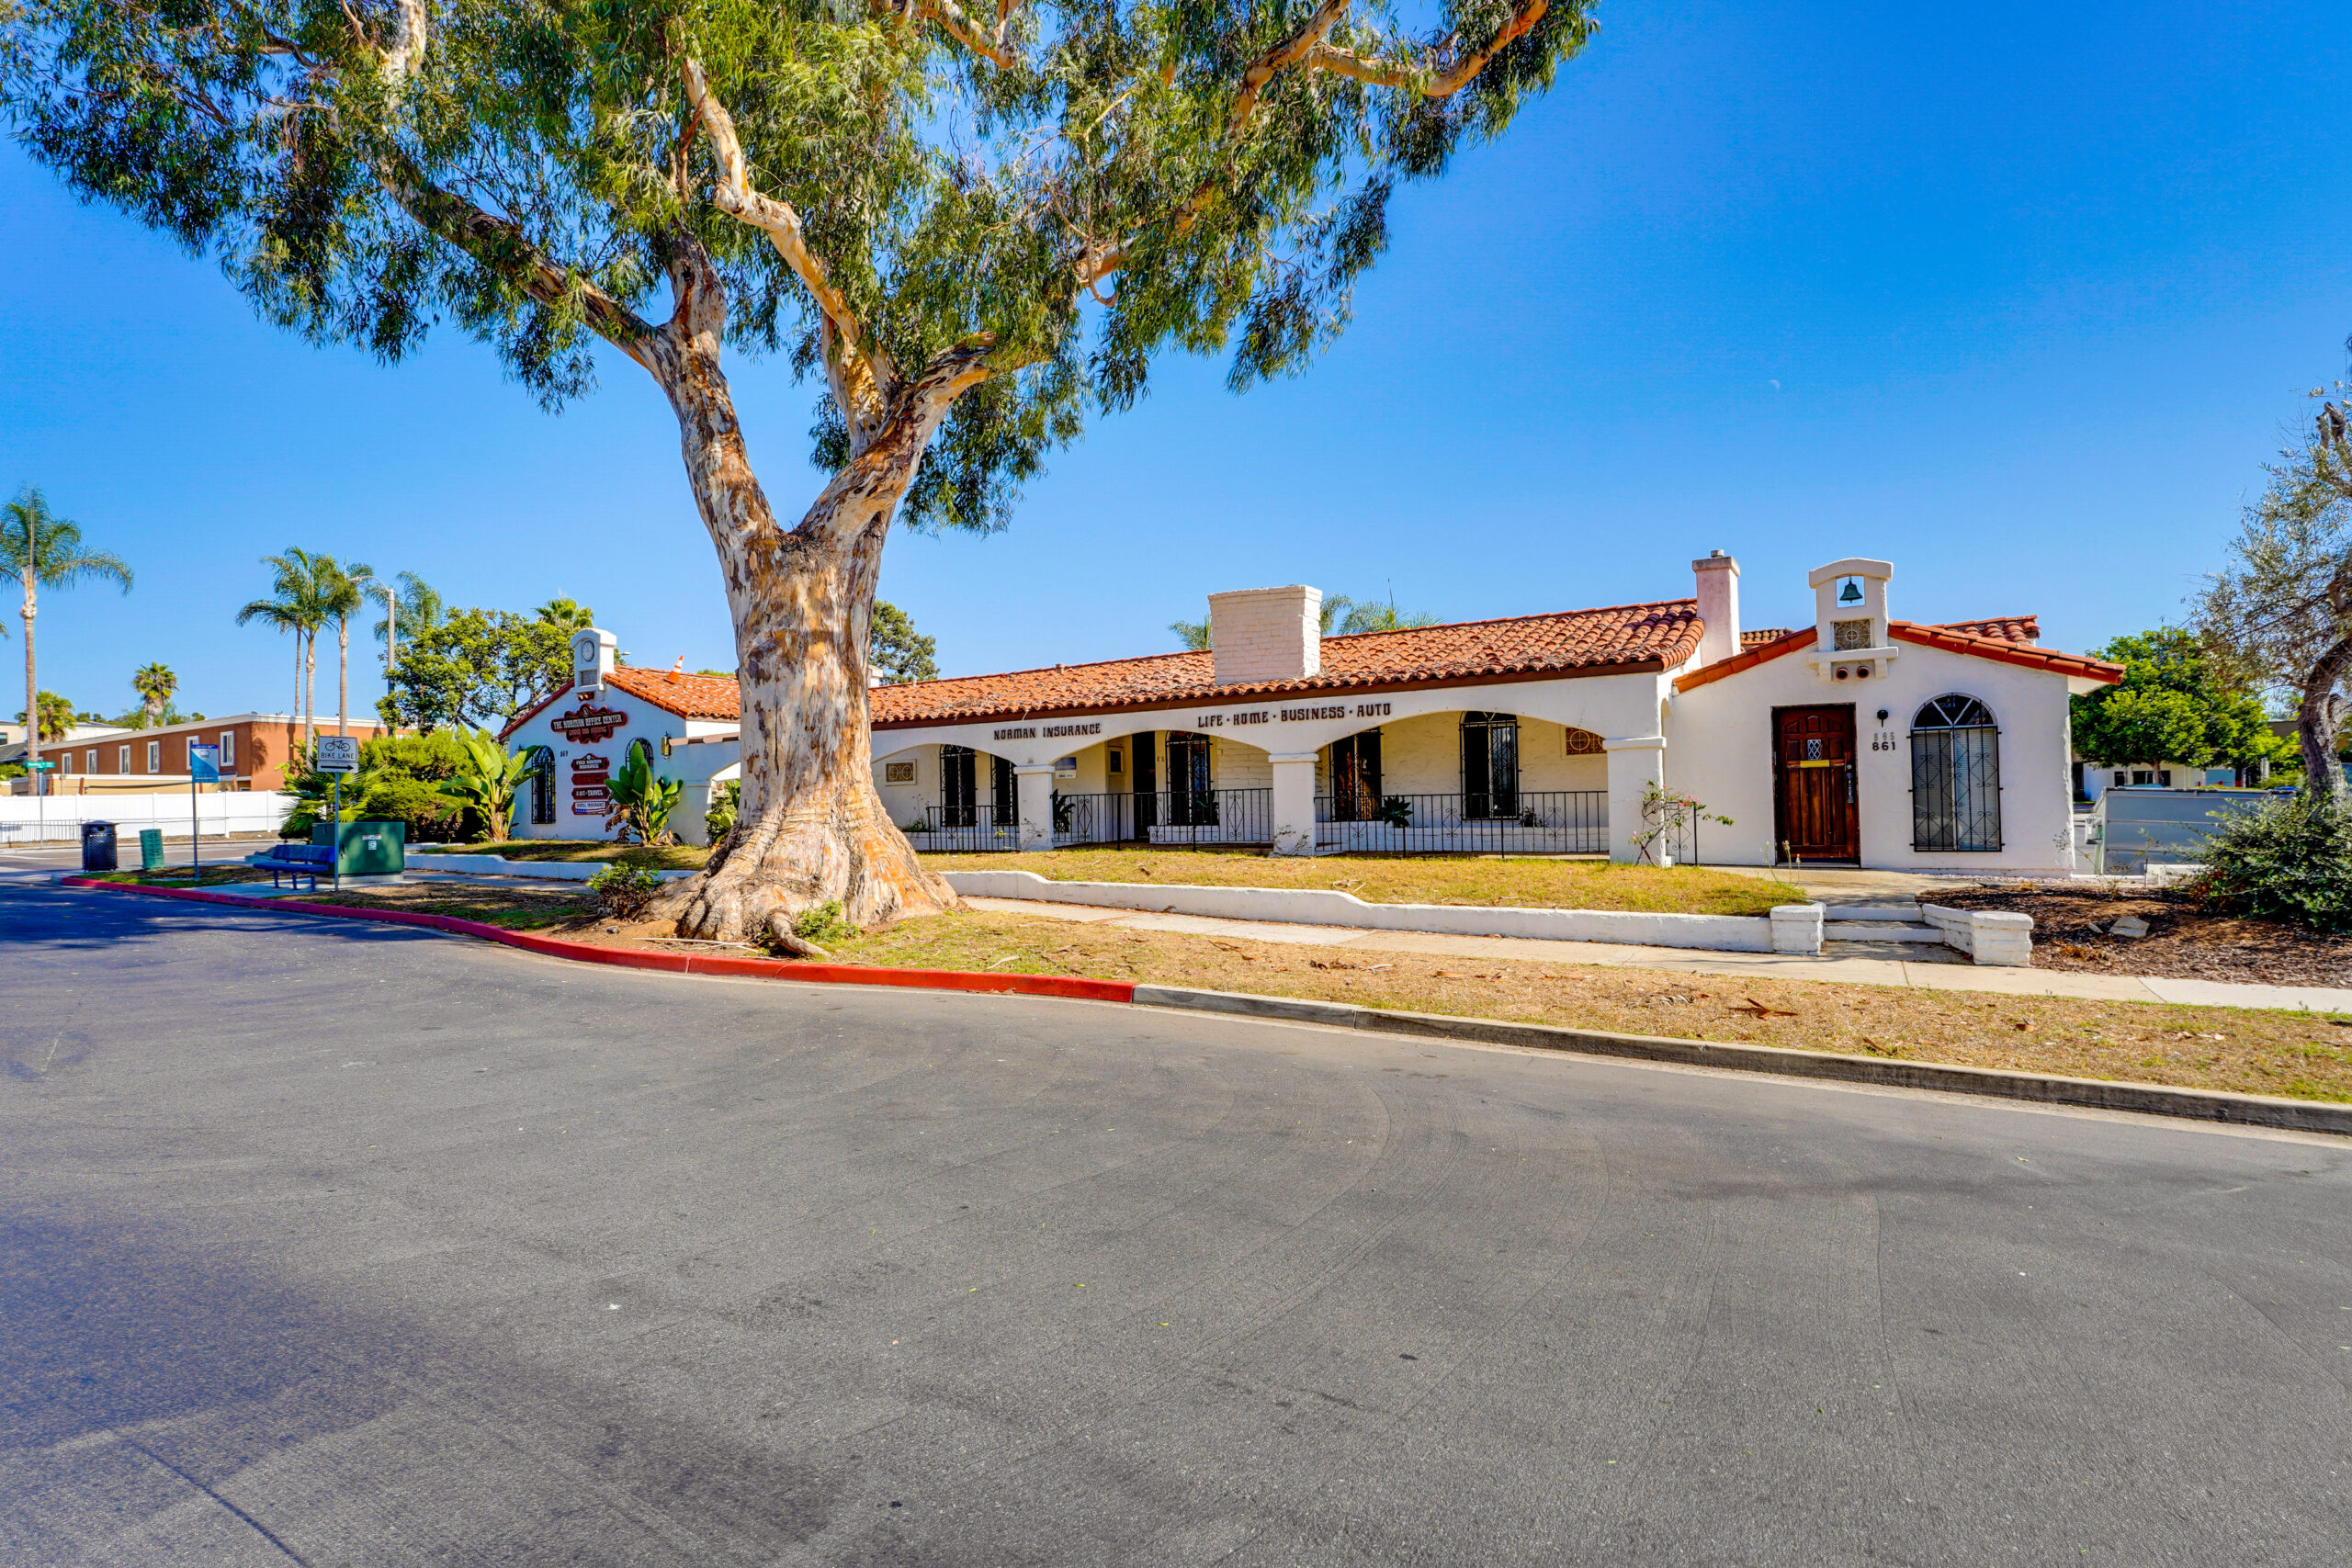 carlsbad-village-building-sold-for-first-time-in-40-years